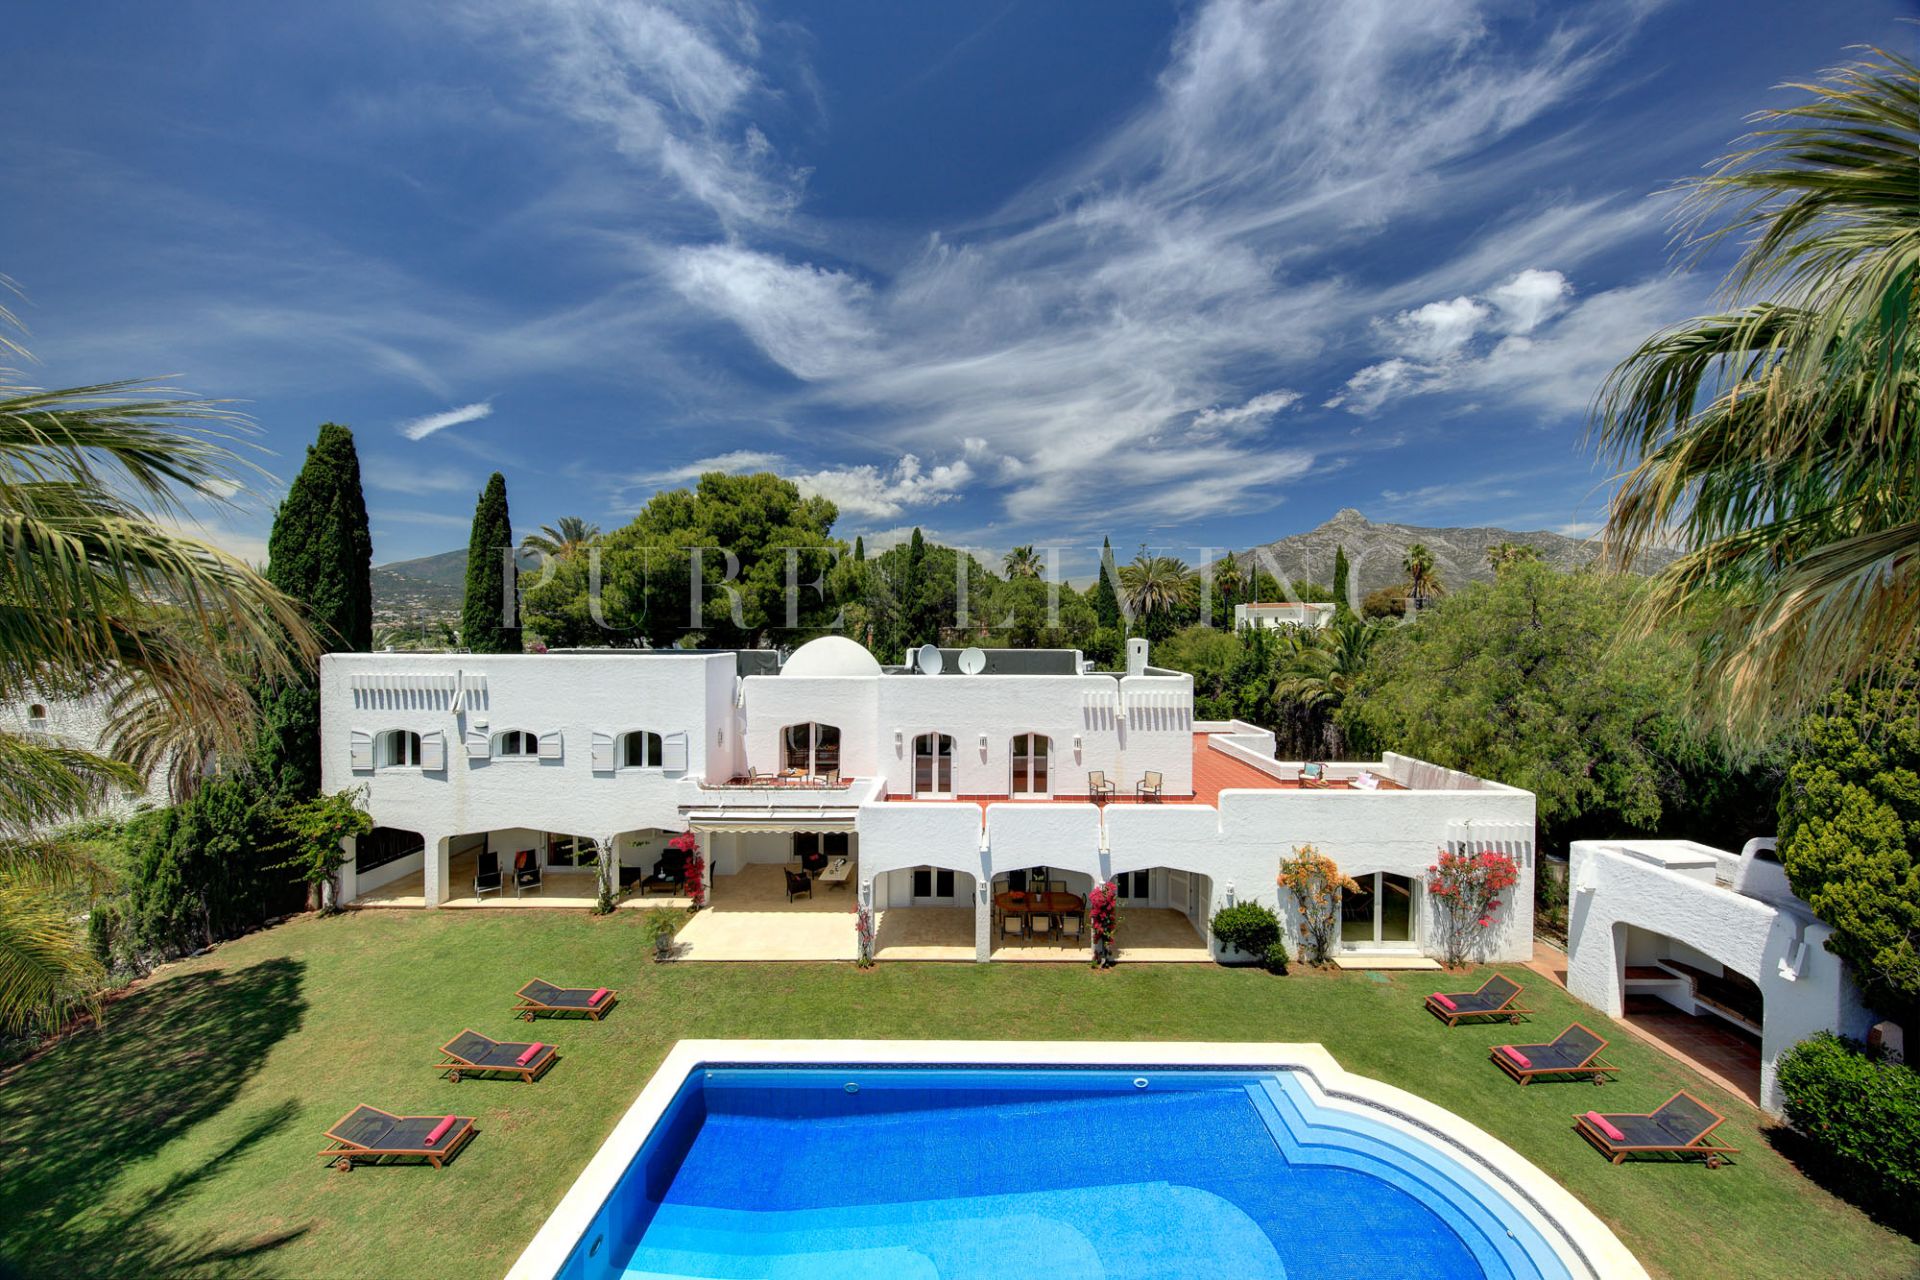 Authentic Andalusian-style Villa close to Puerto Banús.